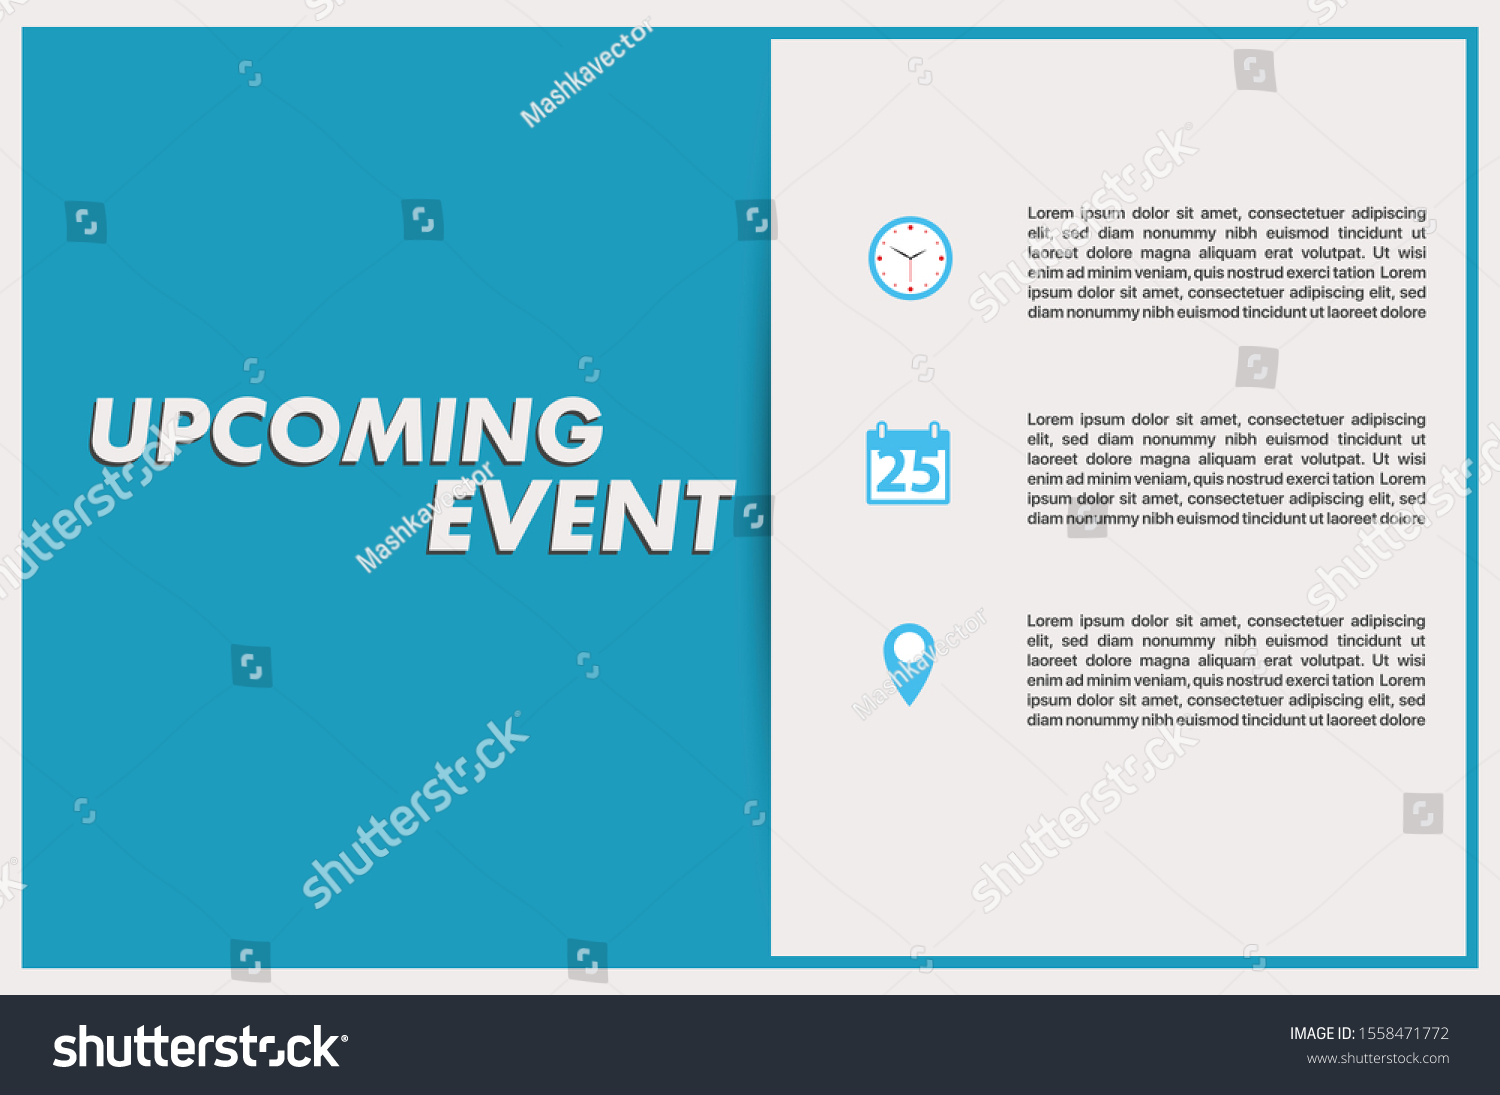 Upcoming Events Template from image.shutterstock.com